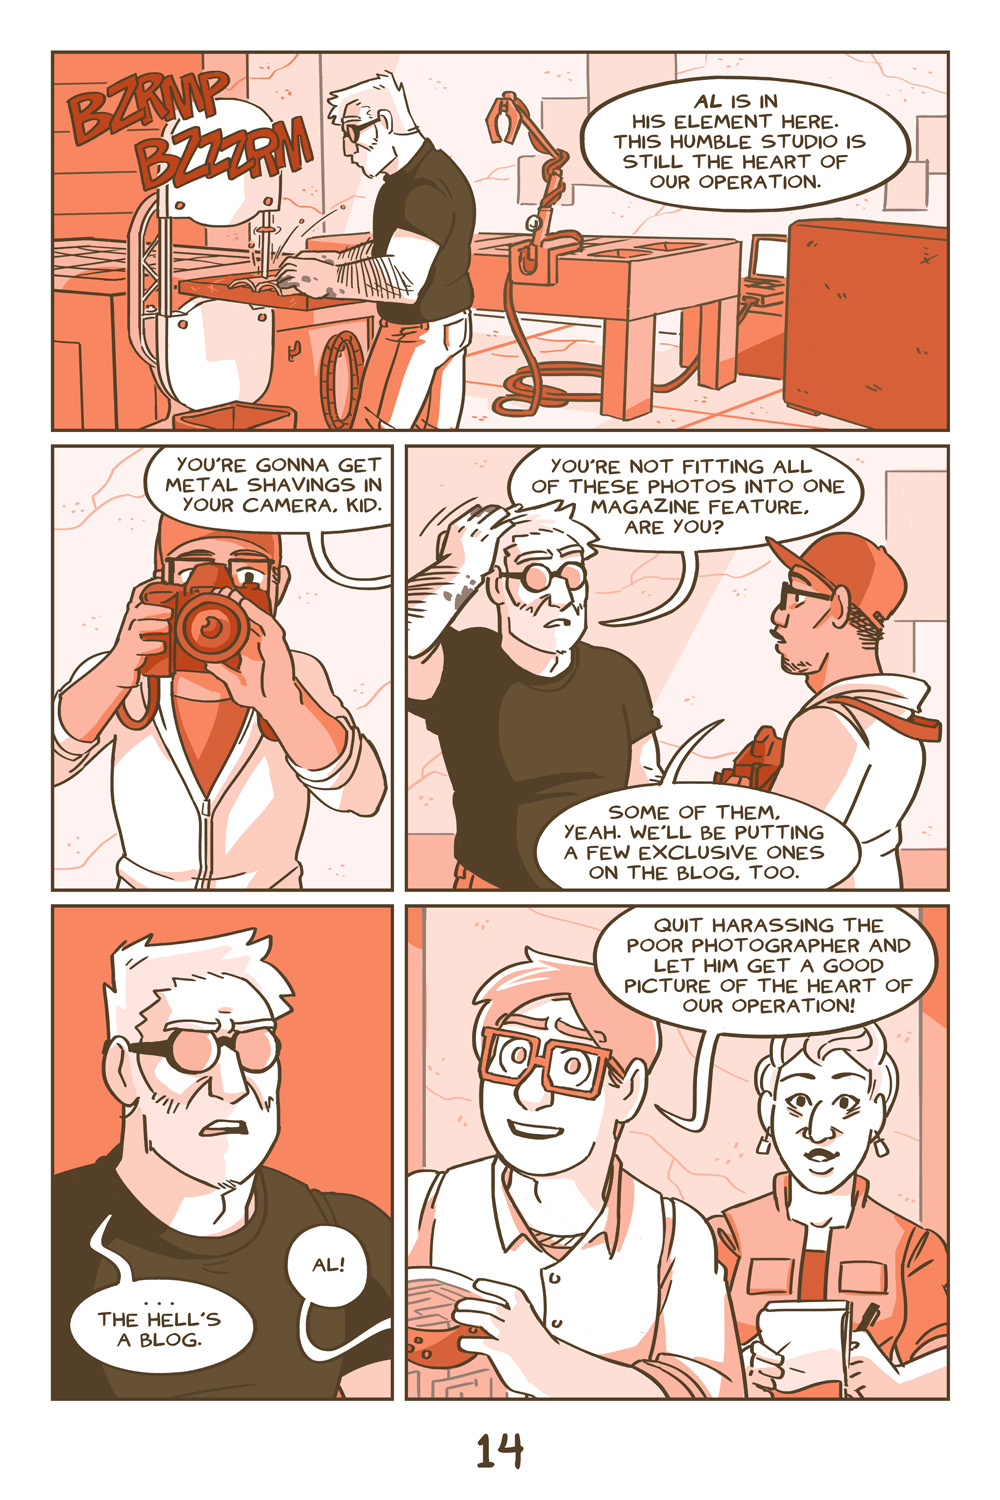 Chapter 4, Page 14